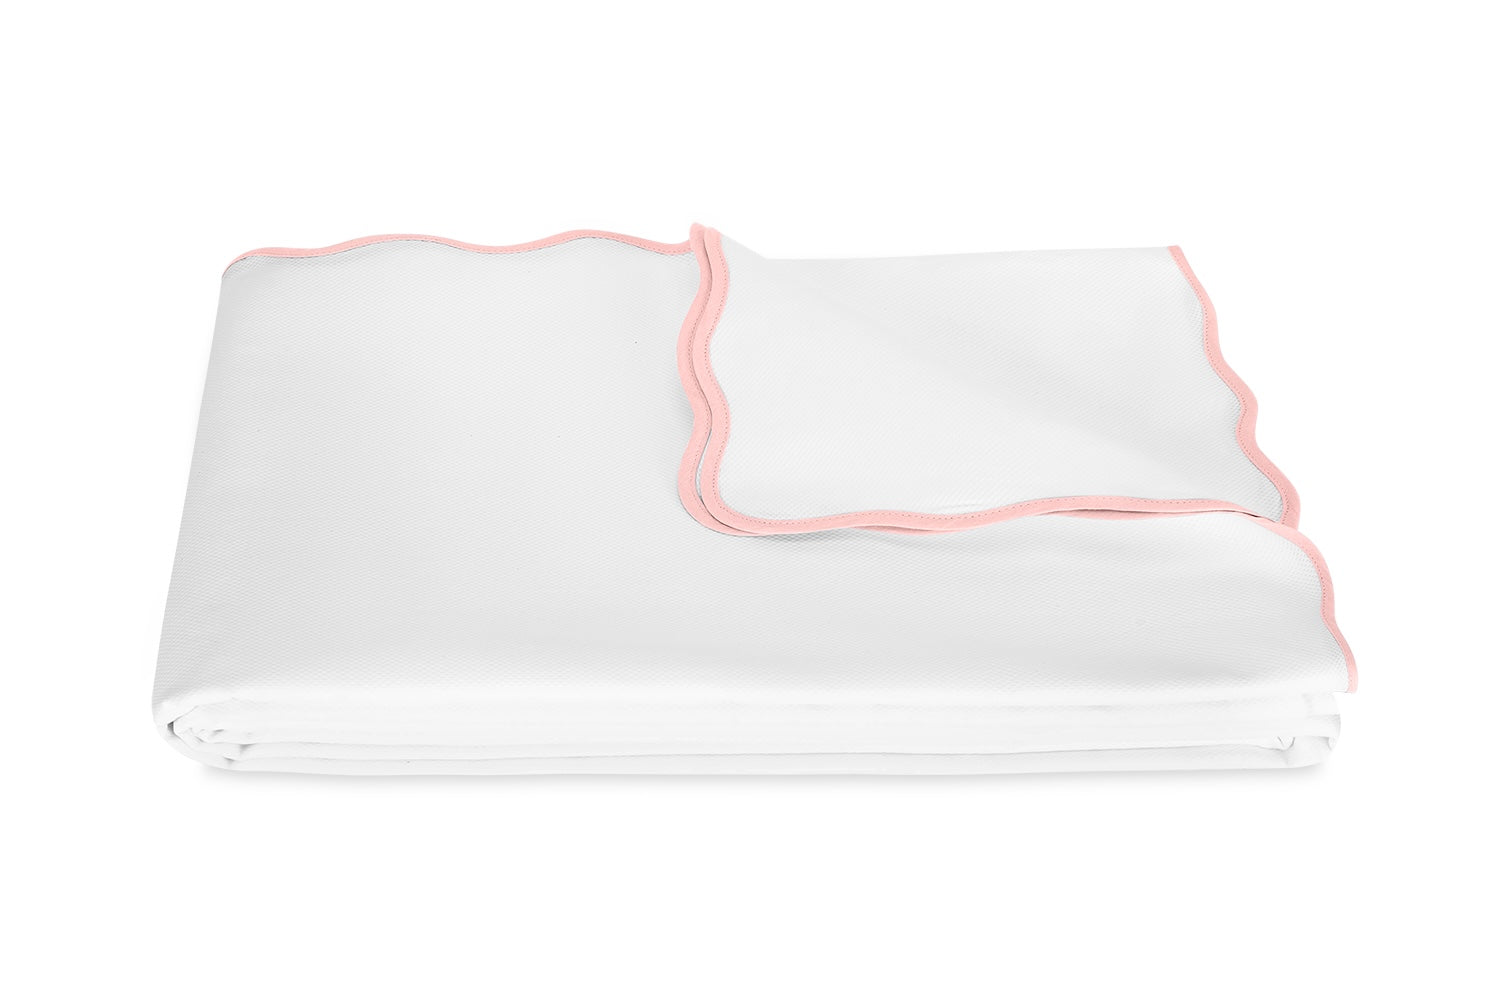 Coverlet - Matouk Camila Pique Pink Blanket Cover at Fig Linens and Home